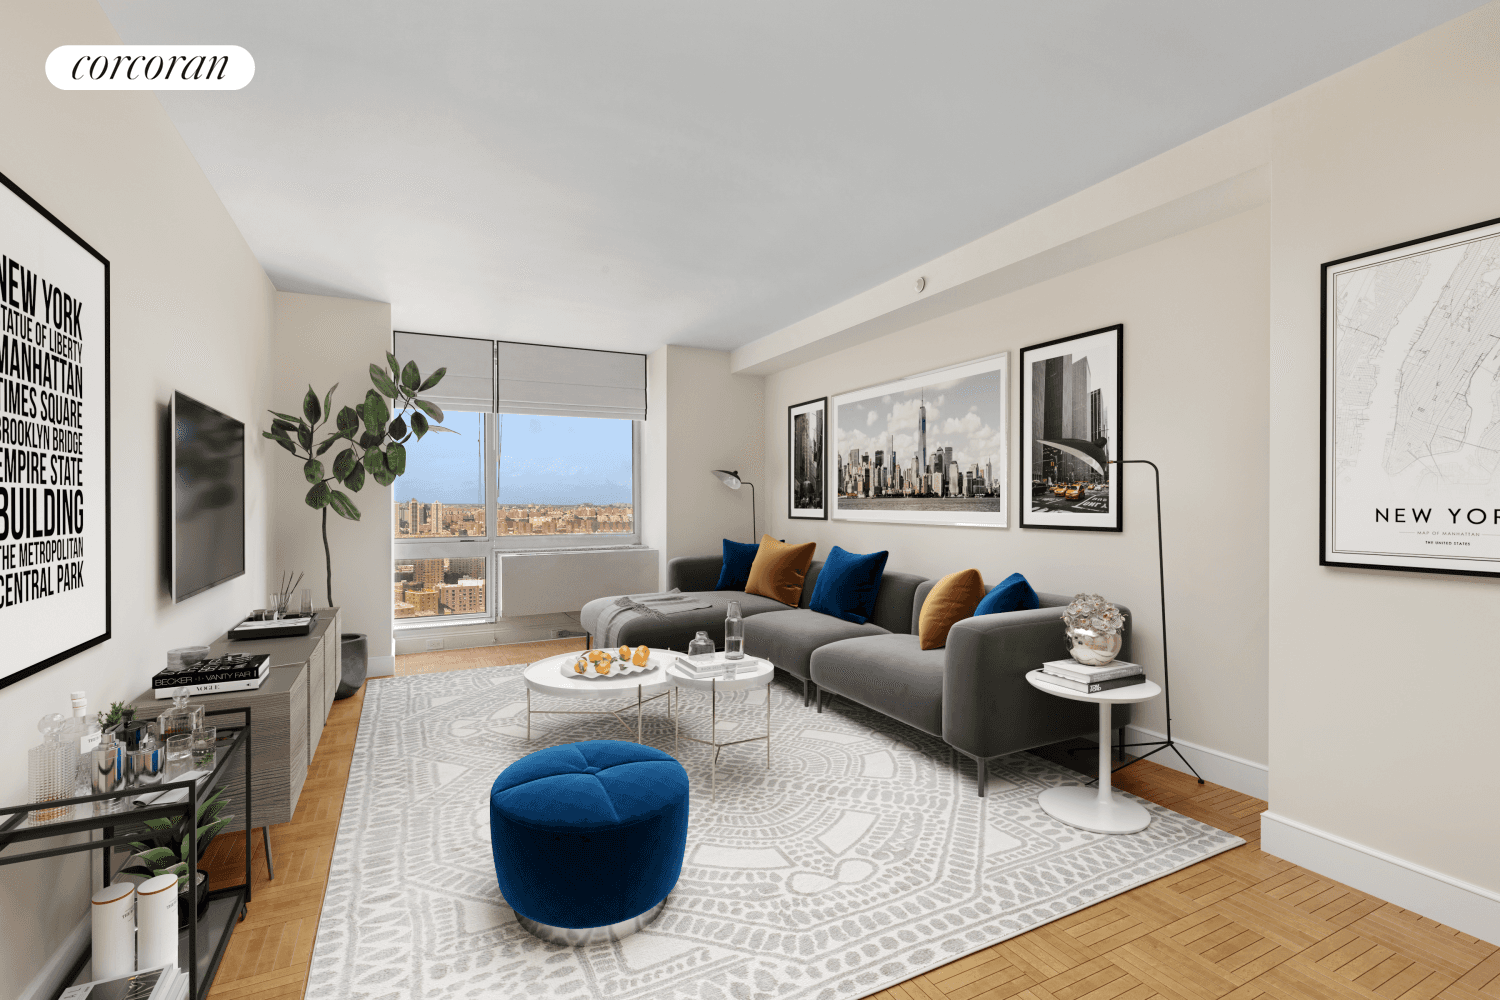 LARGE ONE BEDROOM AT ONE CARNEGIE HILLFloor to ceiling windows offer both great light all day long and spectacular views of the city and East River.